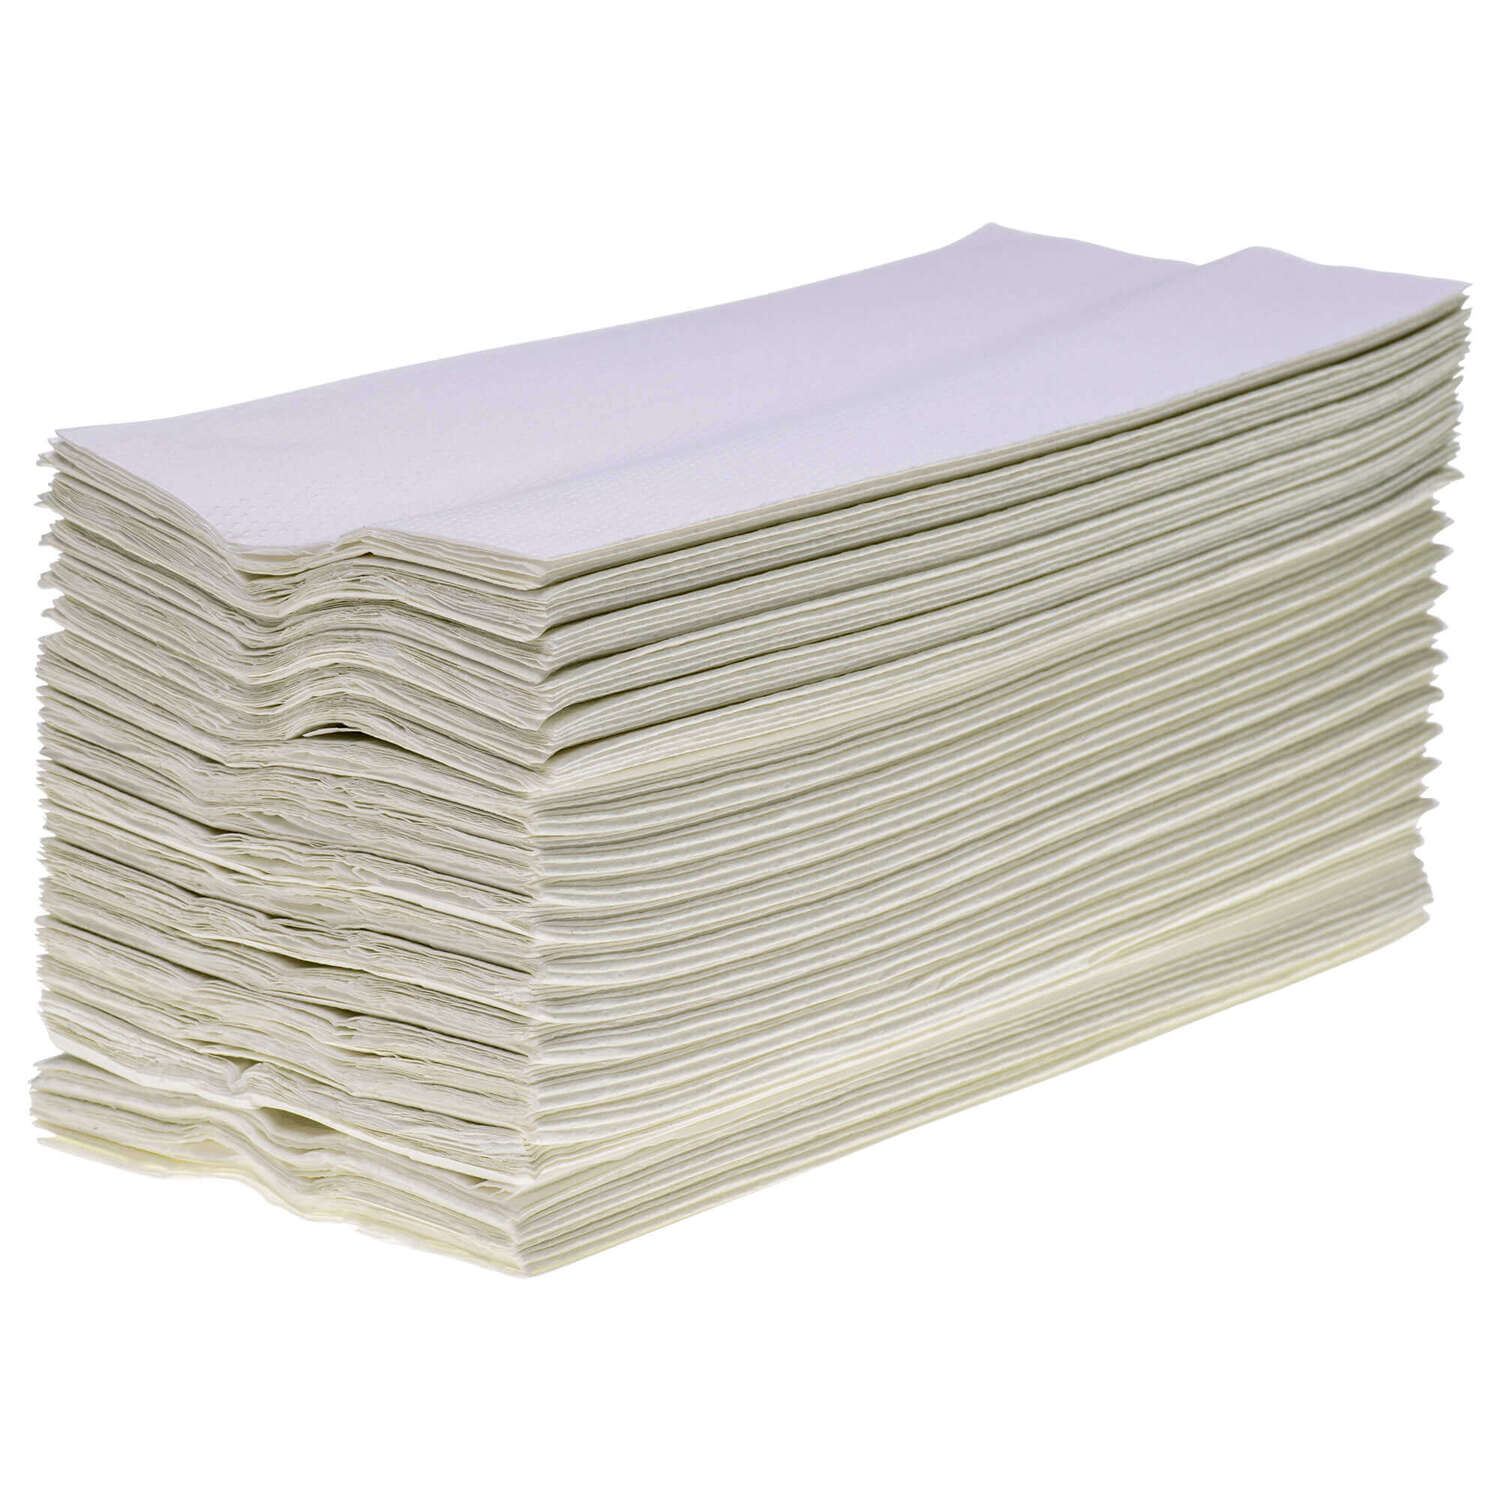 Z Fold Soft Hand Paper Towel Disposable Luxury PAPER White 3000 2ply INTERFOLD 